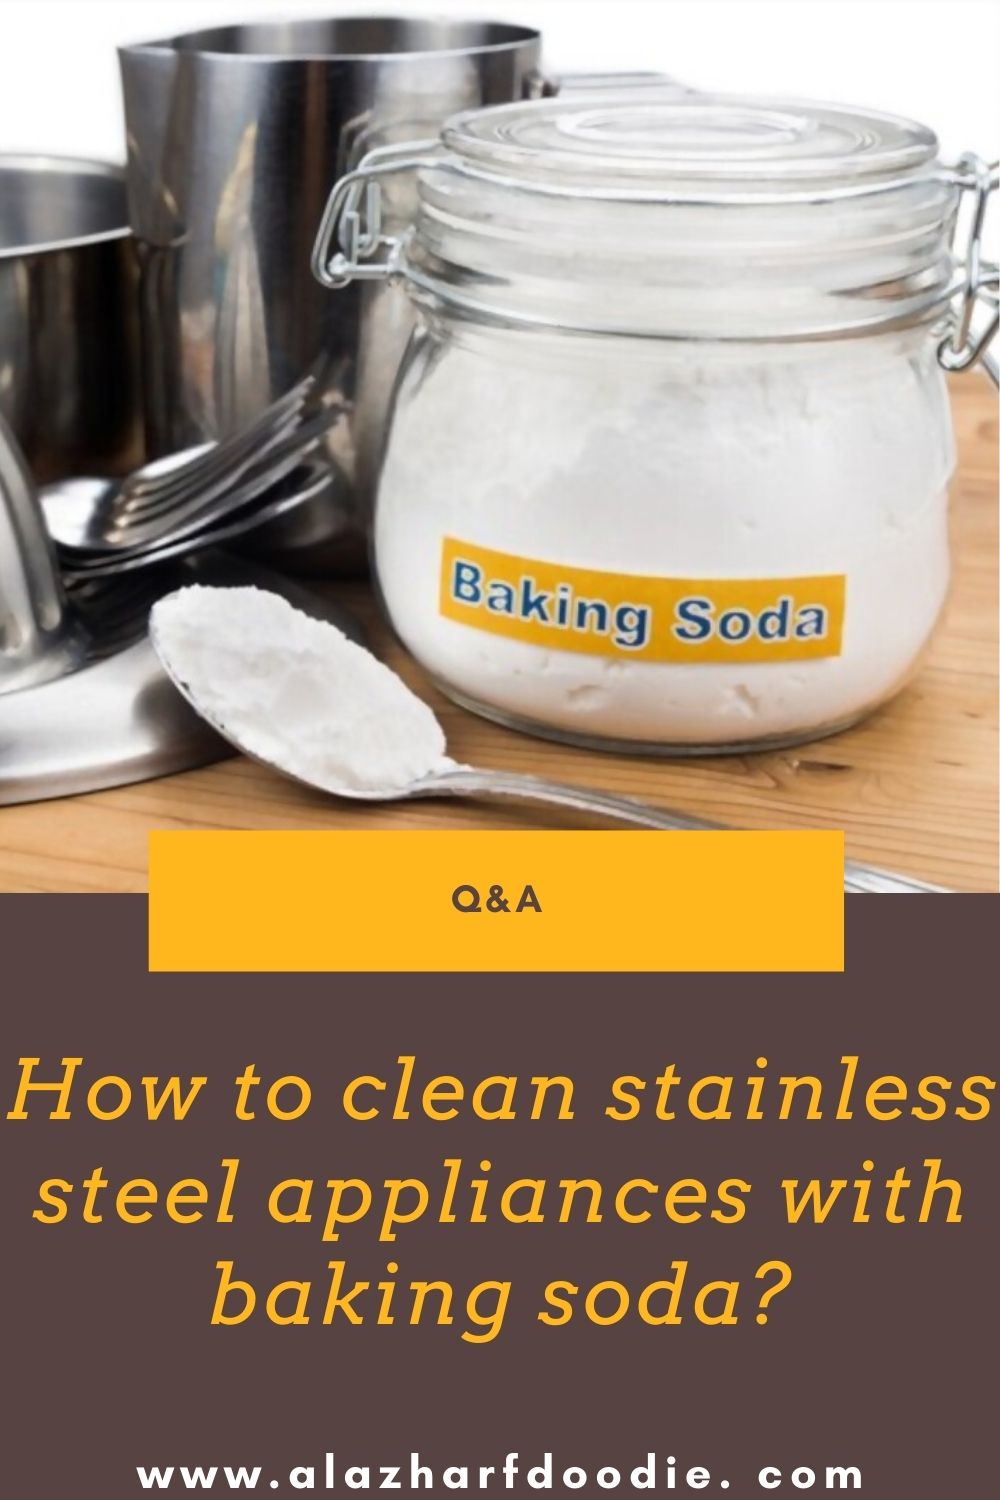 How To Clean Stainless Steel Appliances With Baking Soda? » Al